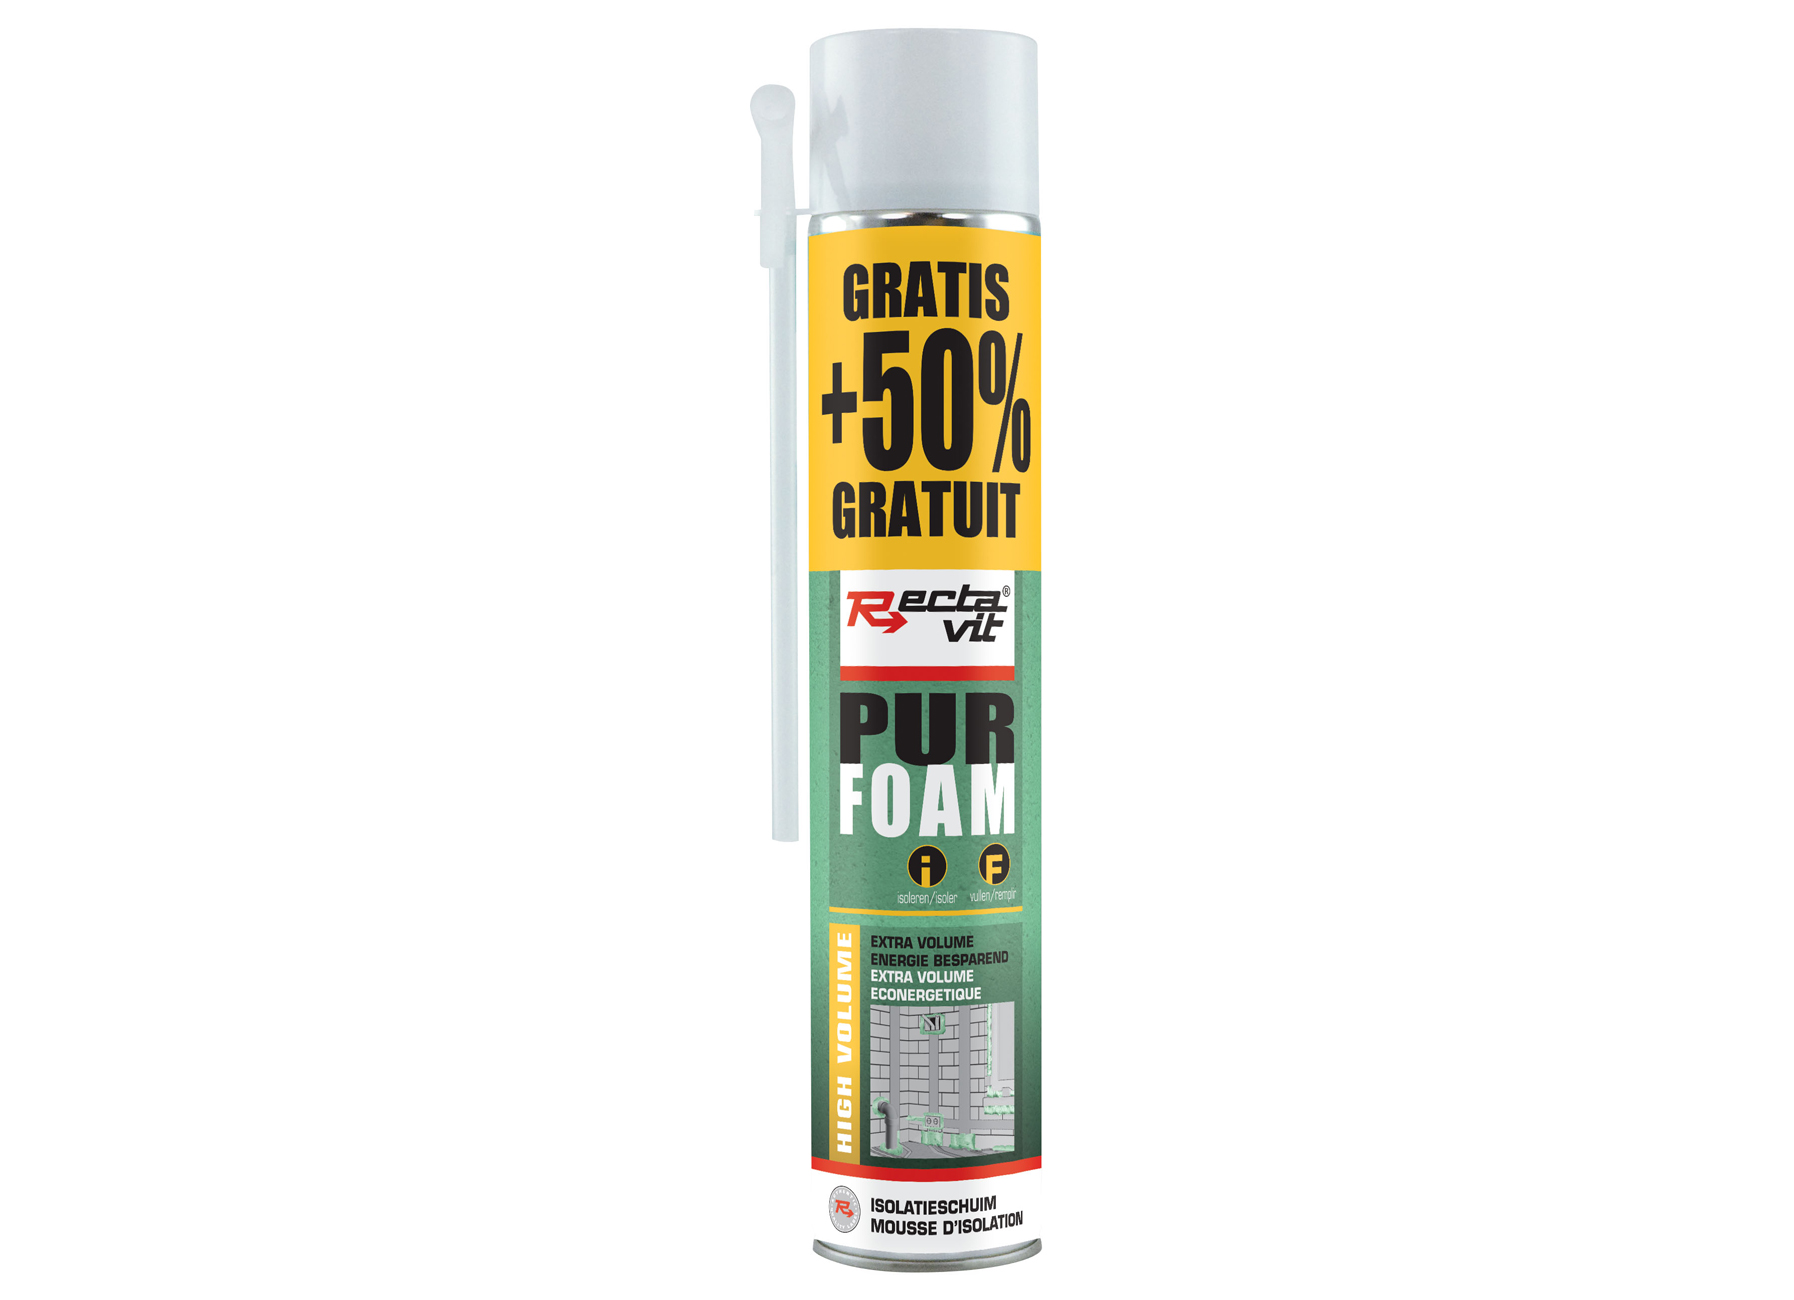 Sika Boom-405 Water Stop 400ml - fixations - fixation chimique